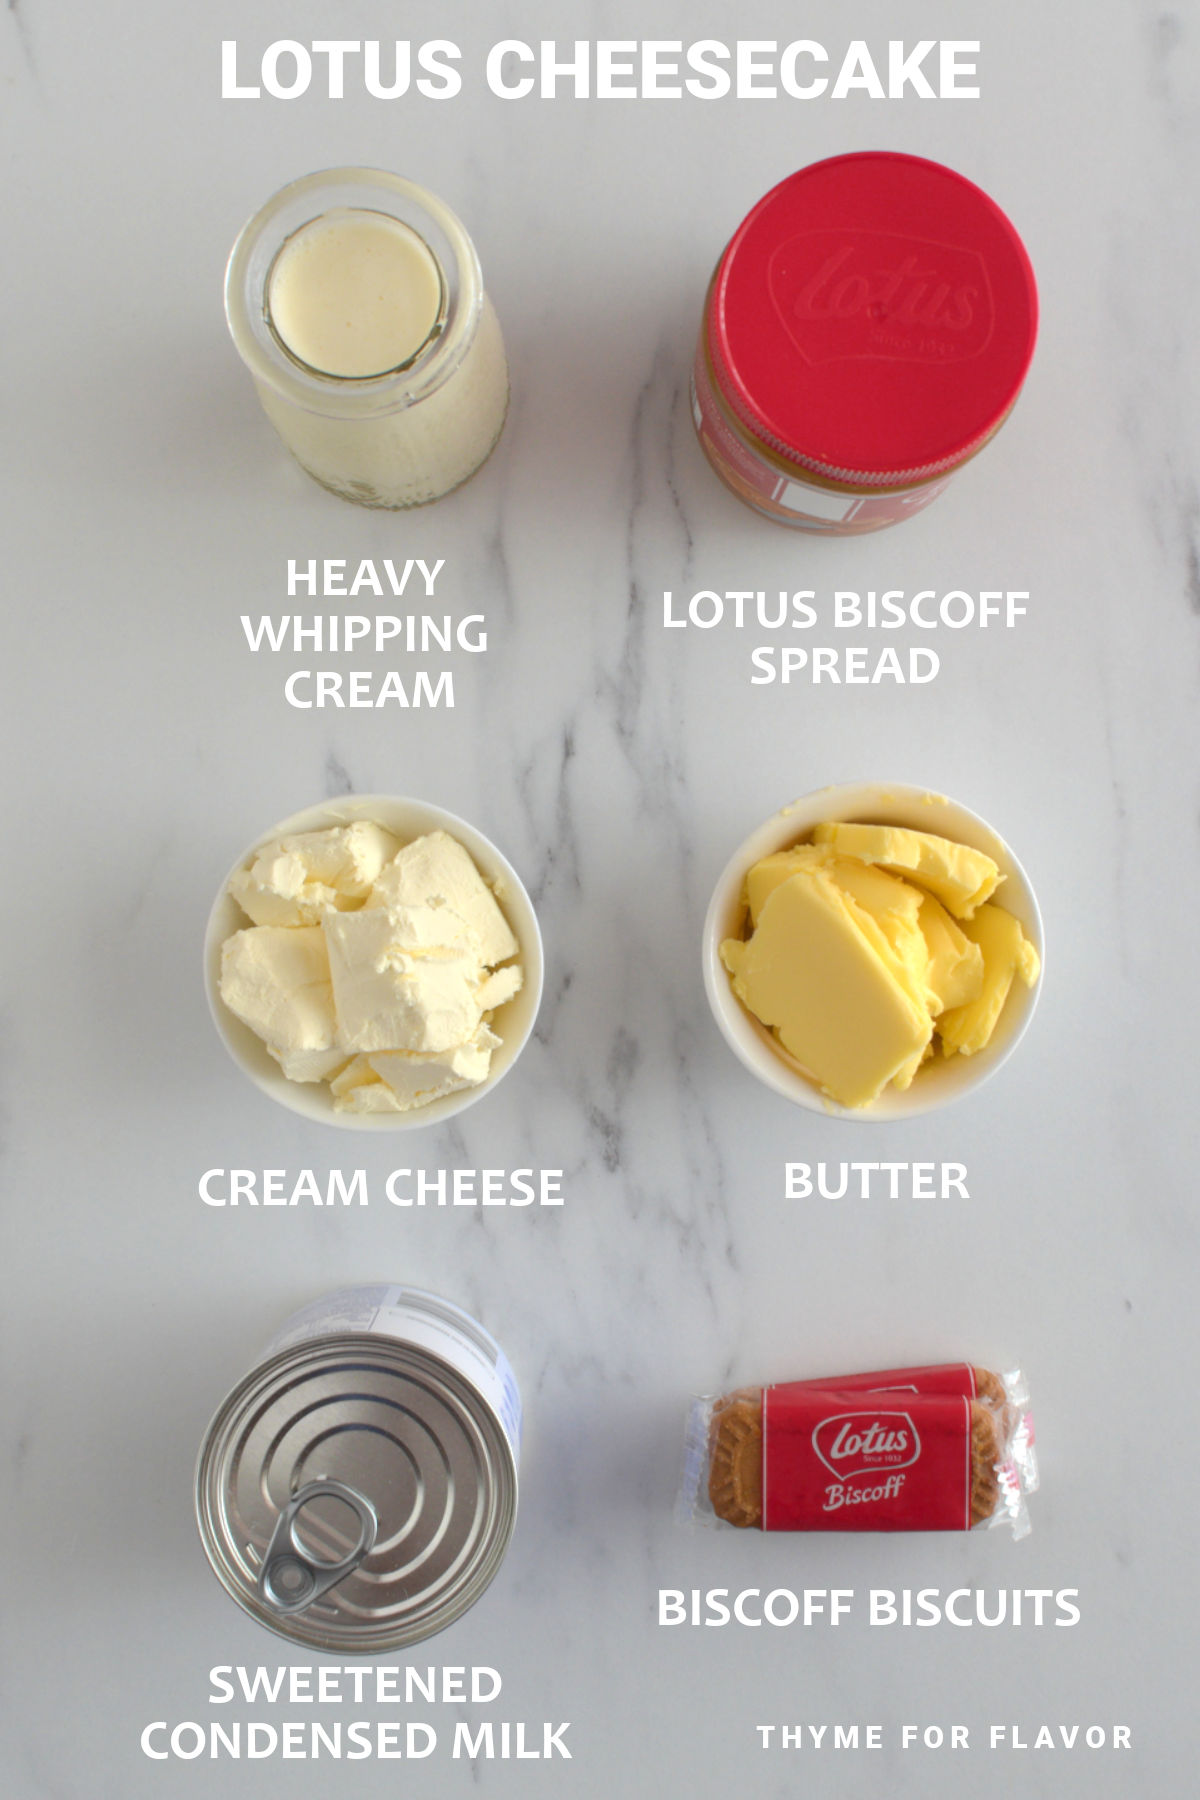 Ingredients for lotus cheesecake.